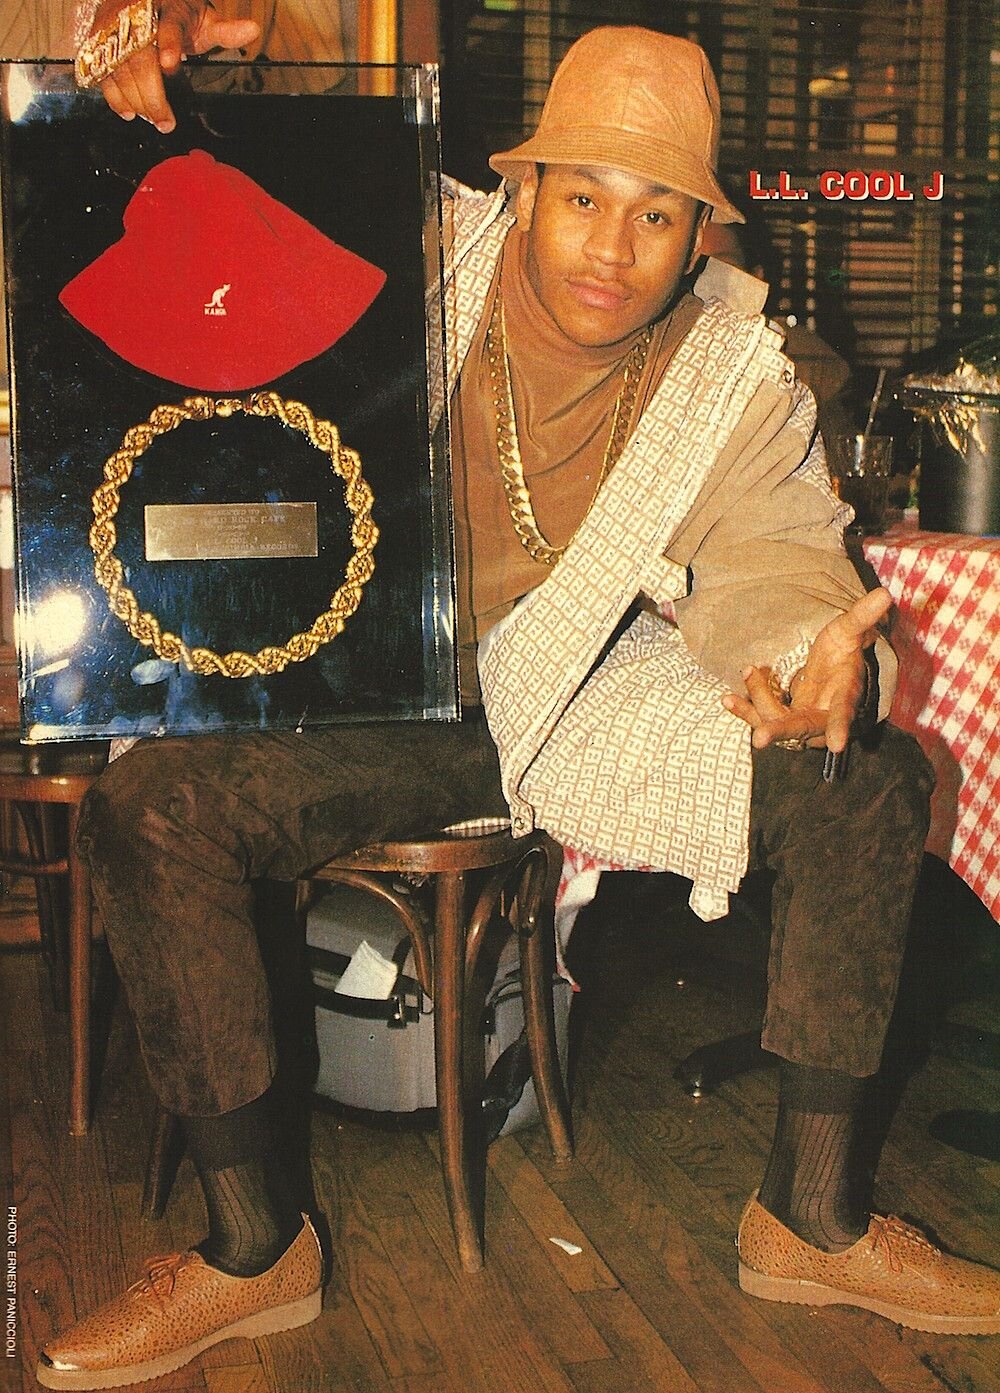 LL Cool J poses with his iconic red Kangol hat